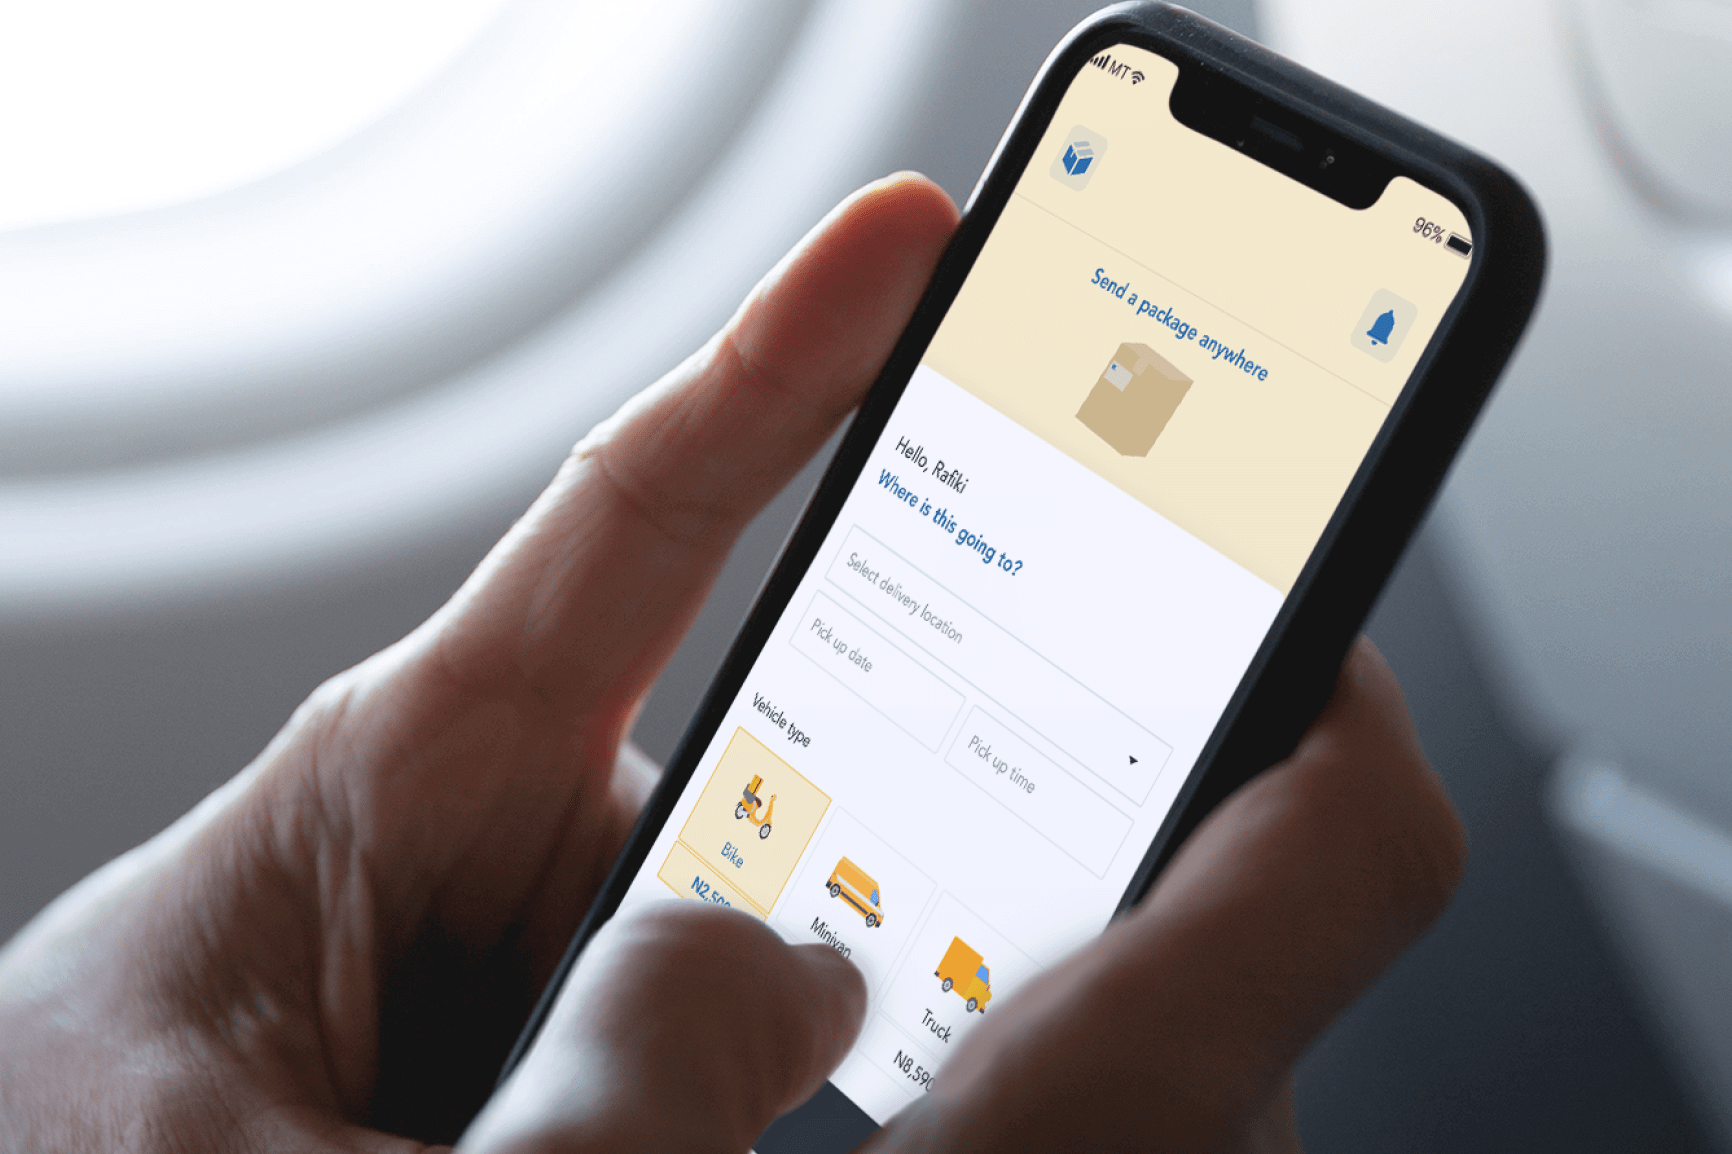 Bus-hailing startup launches delivery service, Logistics by Plentywaka